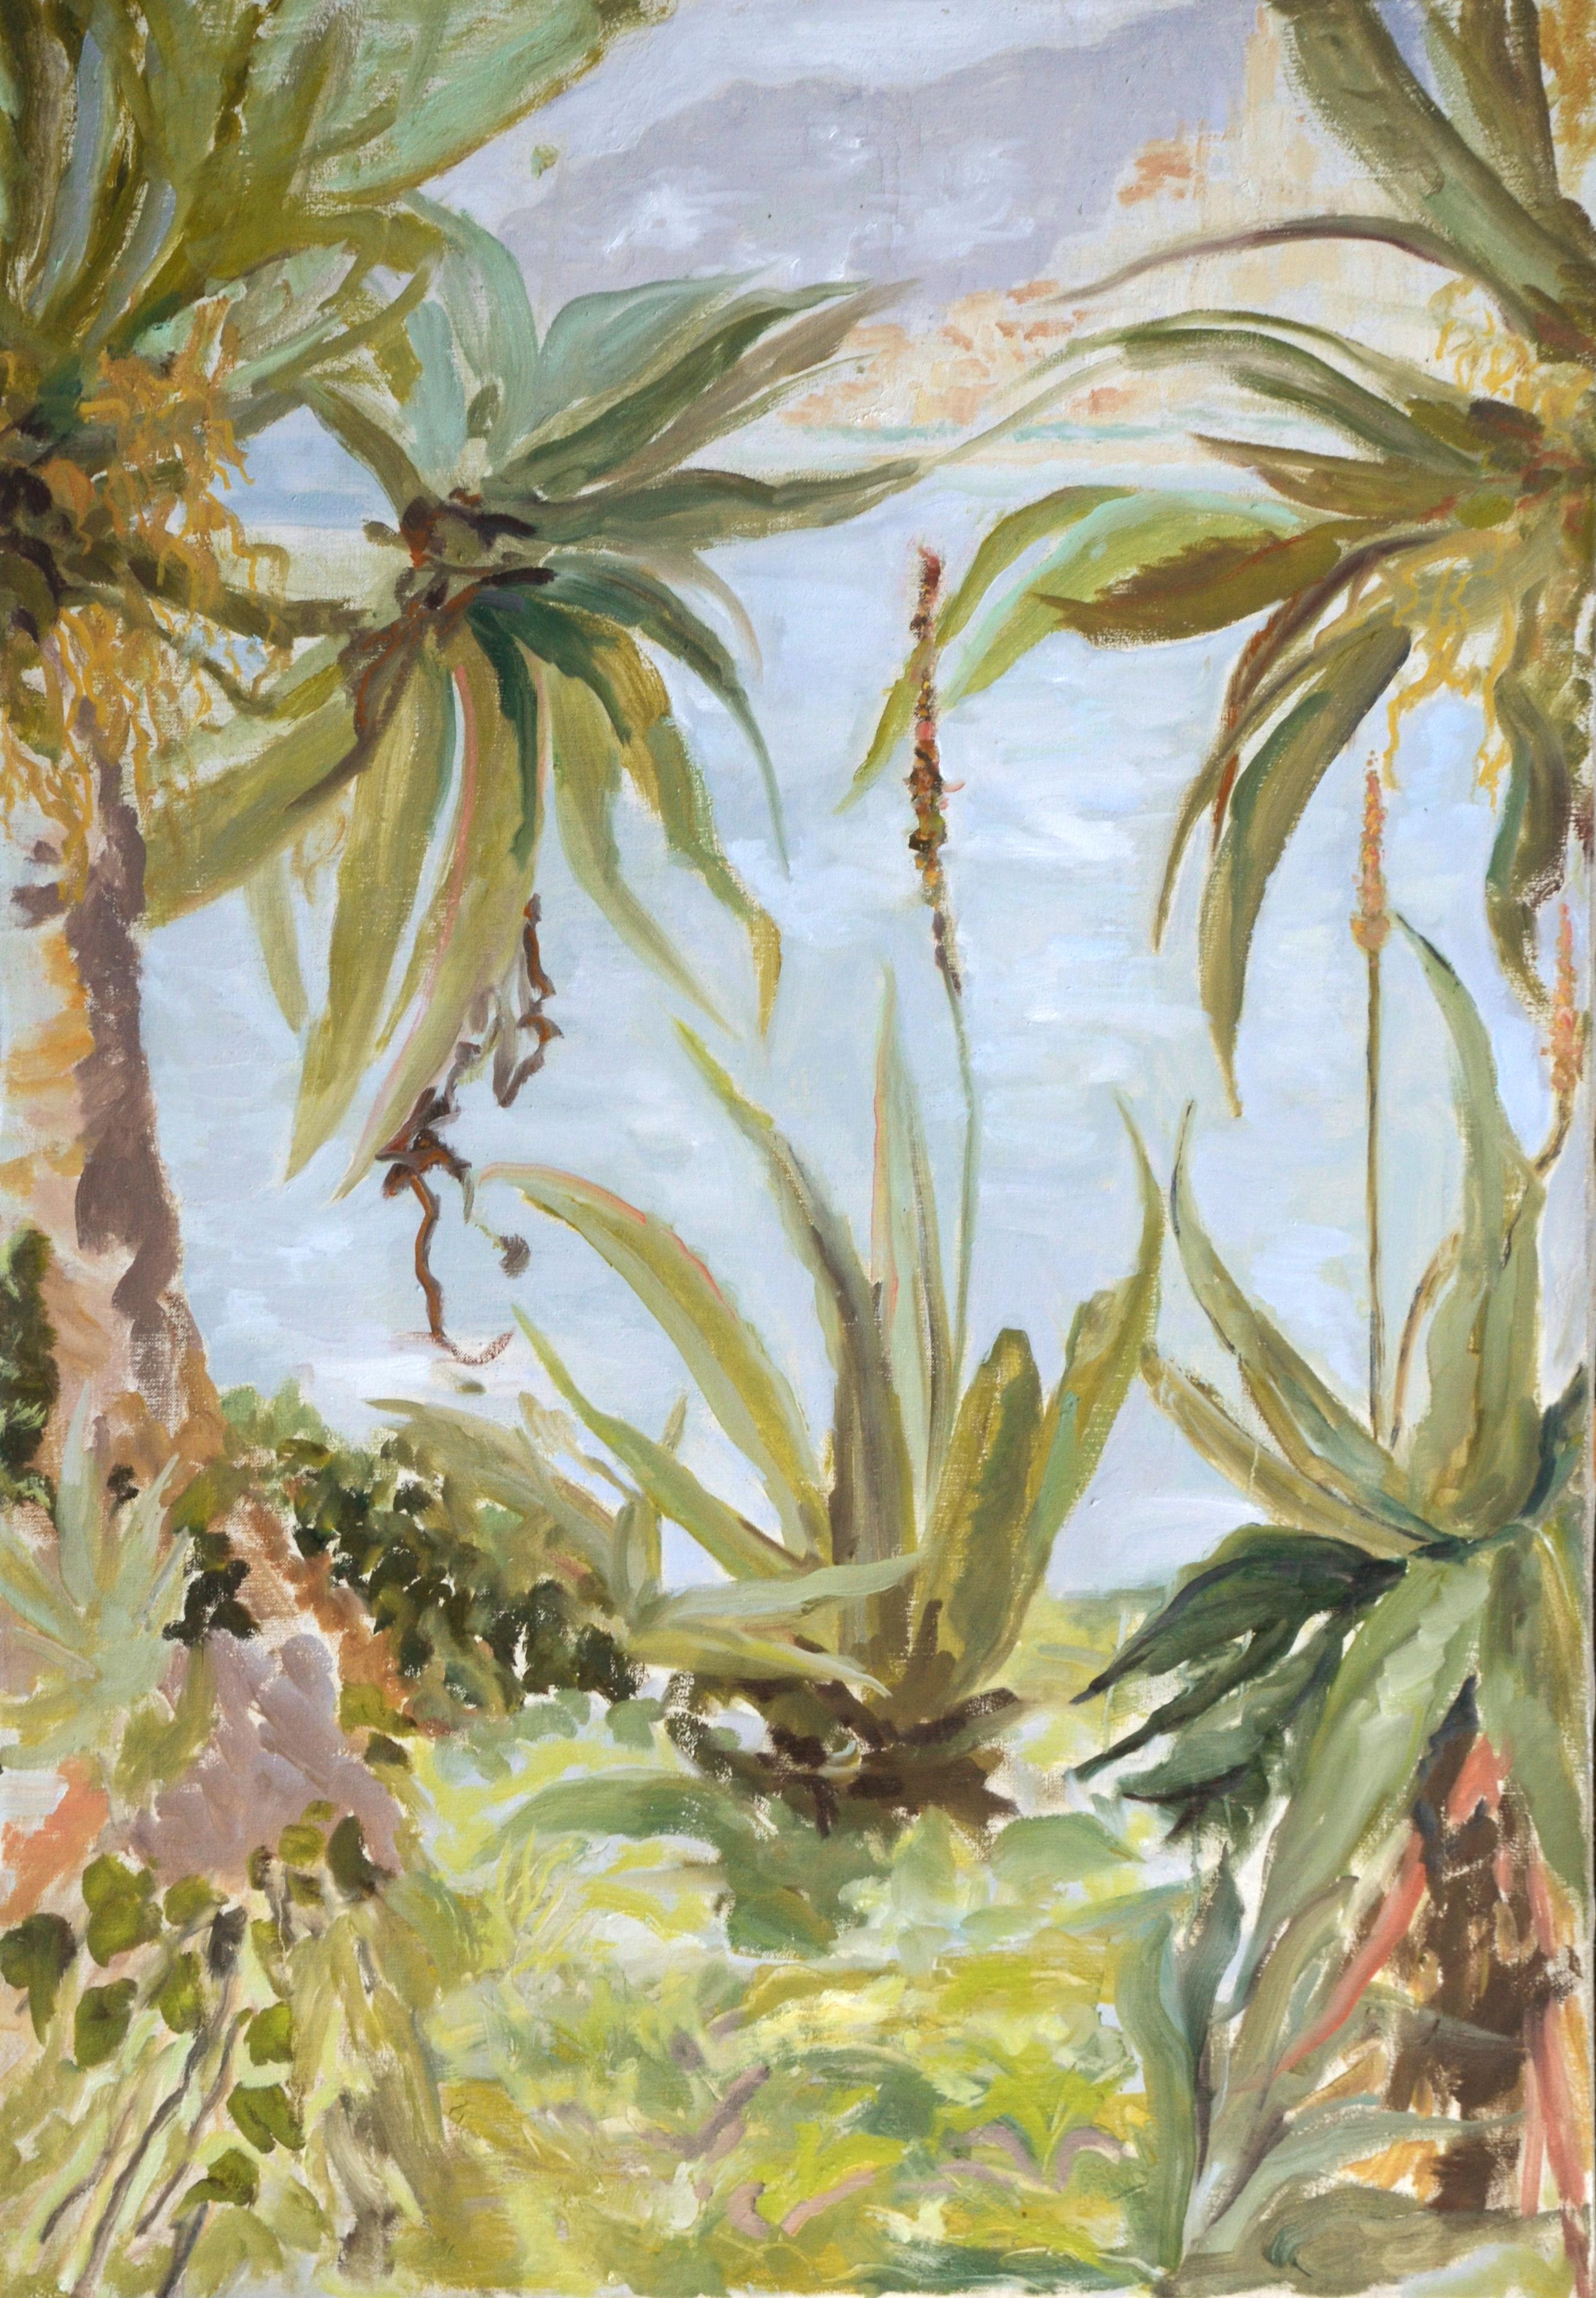 Contemporary Landscape Mediterranean Green & Coral Aloes and the City of Menton

This piece was painted at the Maria Serena Garden, which is on the border between France and Italy, on the French side, overlooking the Mediterranean.  Charles Garnier,